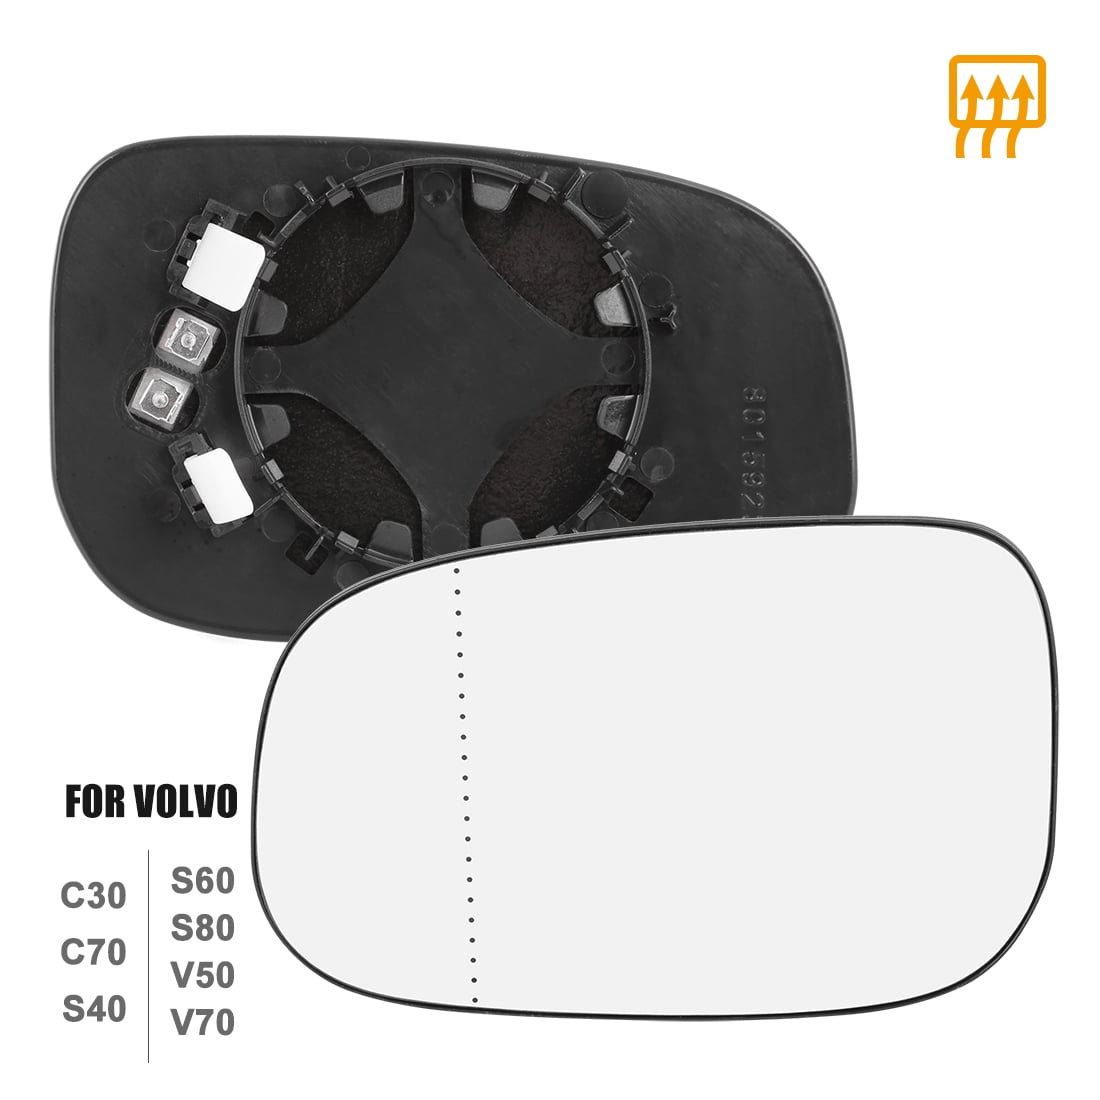 V50 Driver Side S60 C70 Adhesive For Volvo C30 S80 S40 Mirror Glass